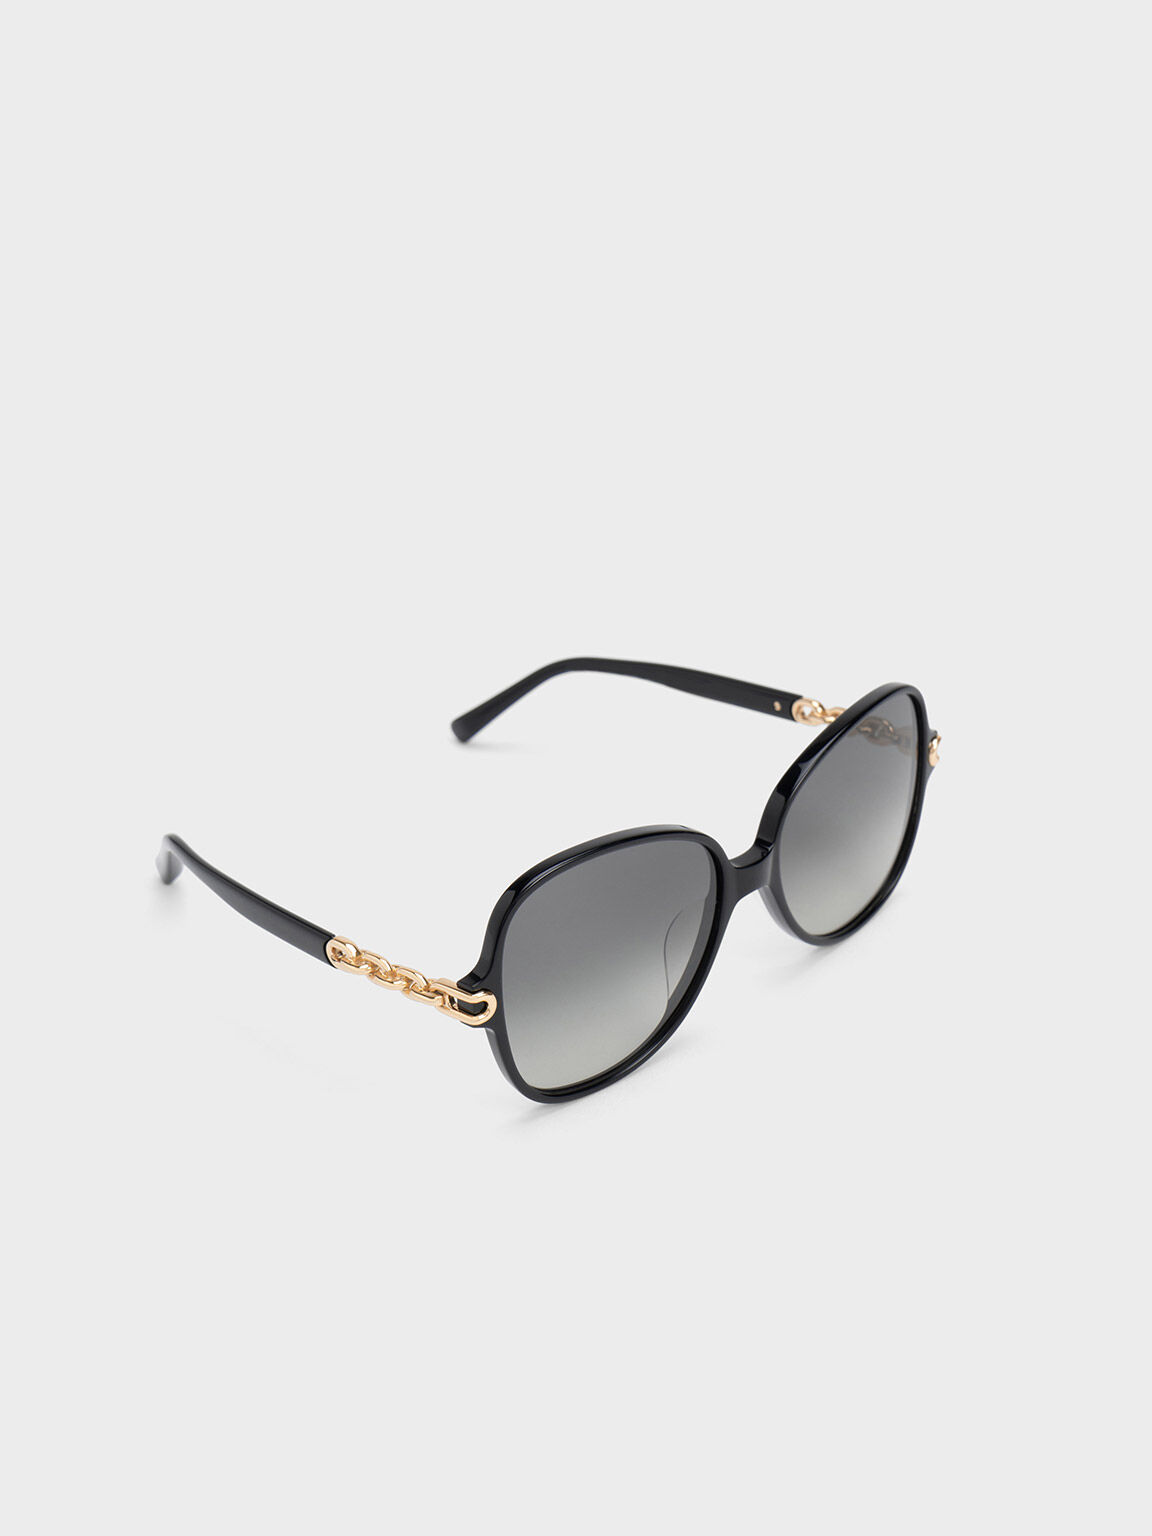 Women's Sunglasses | Exclusives Styles | CHARLES & KEITH International